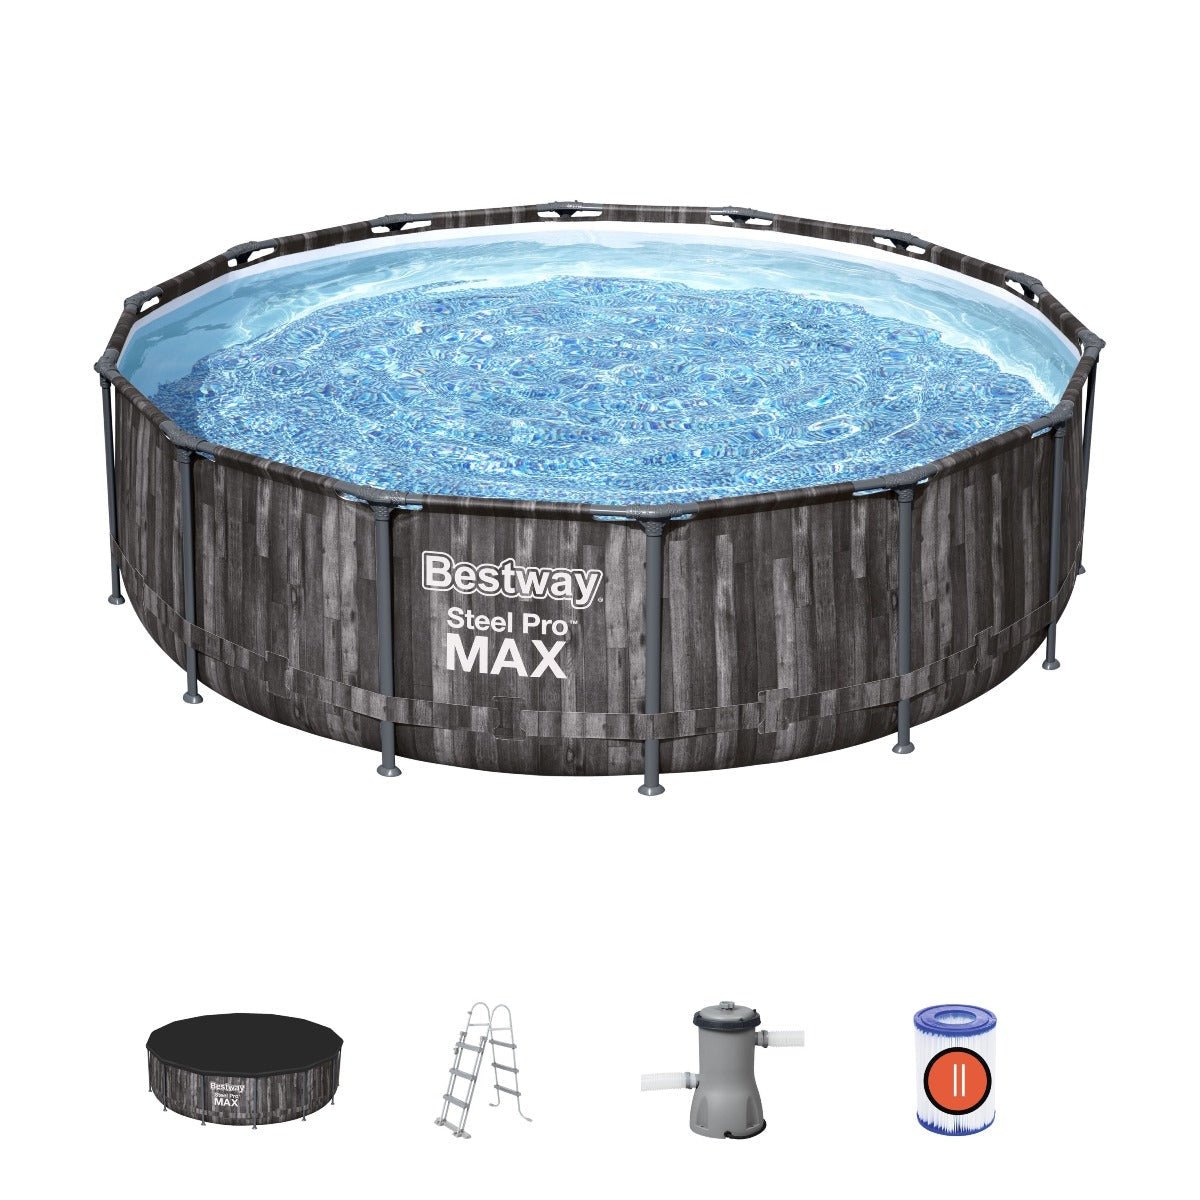 Bestway 14ft x 42in Steel Pro Max Above Ground Swimming Pool